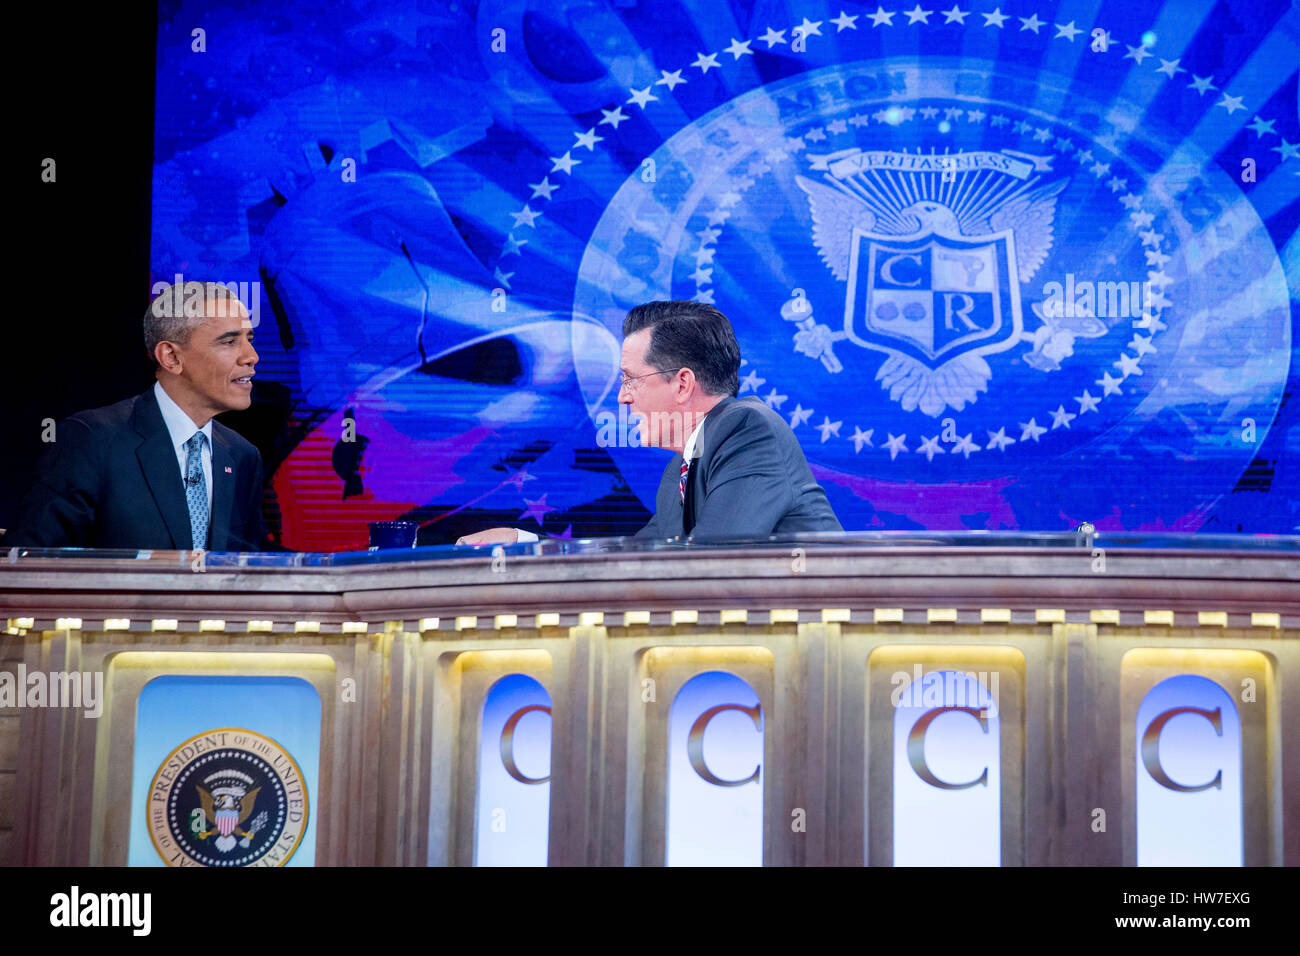 United States President Barack Obama left talks to television personality Stephen Colbert during taping of Comedy Central's 'The Colbert Report' in Lisner Auditorium on the campus of George Washington University in Washington D.C. U.S. on Monday December Stock Photo